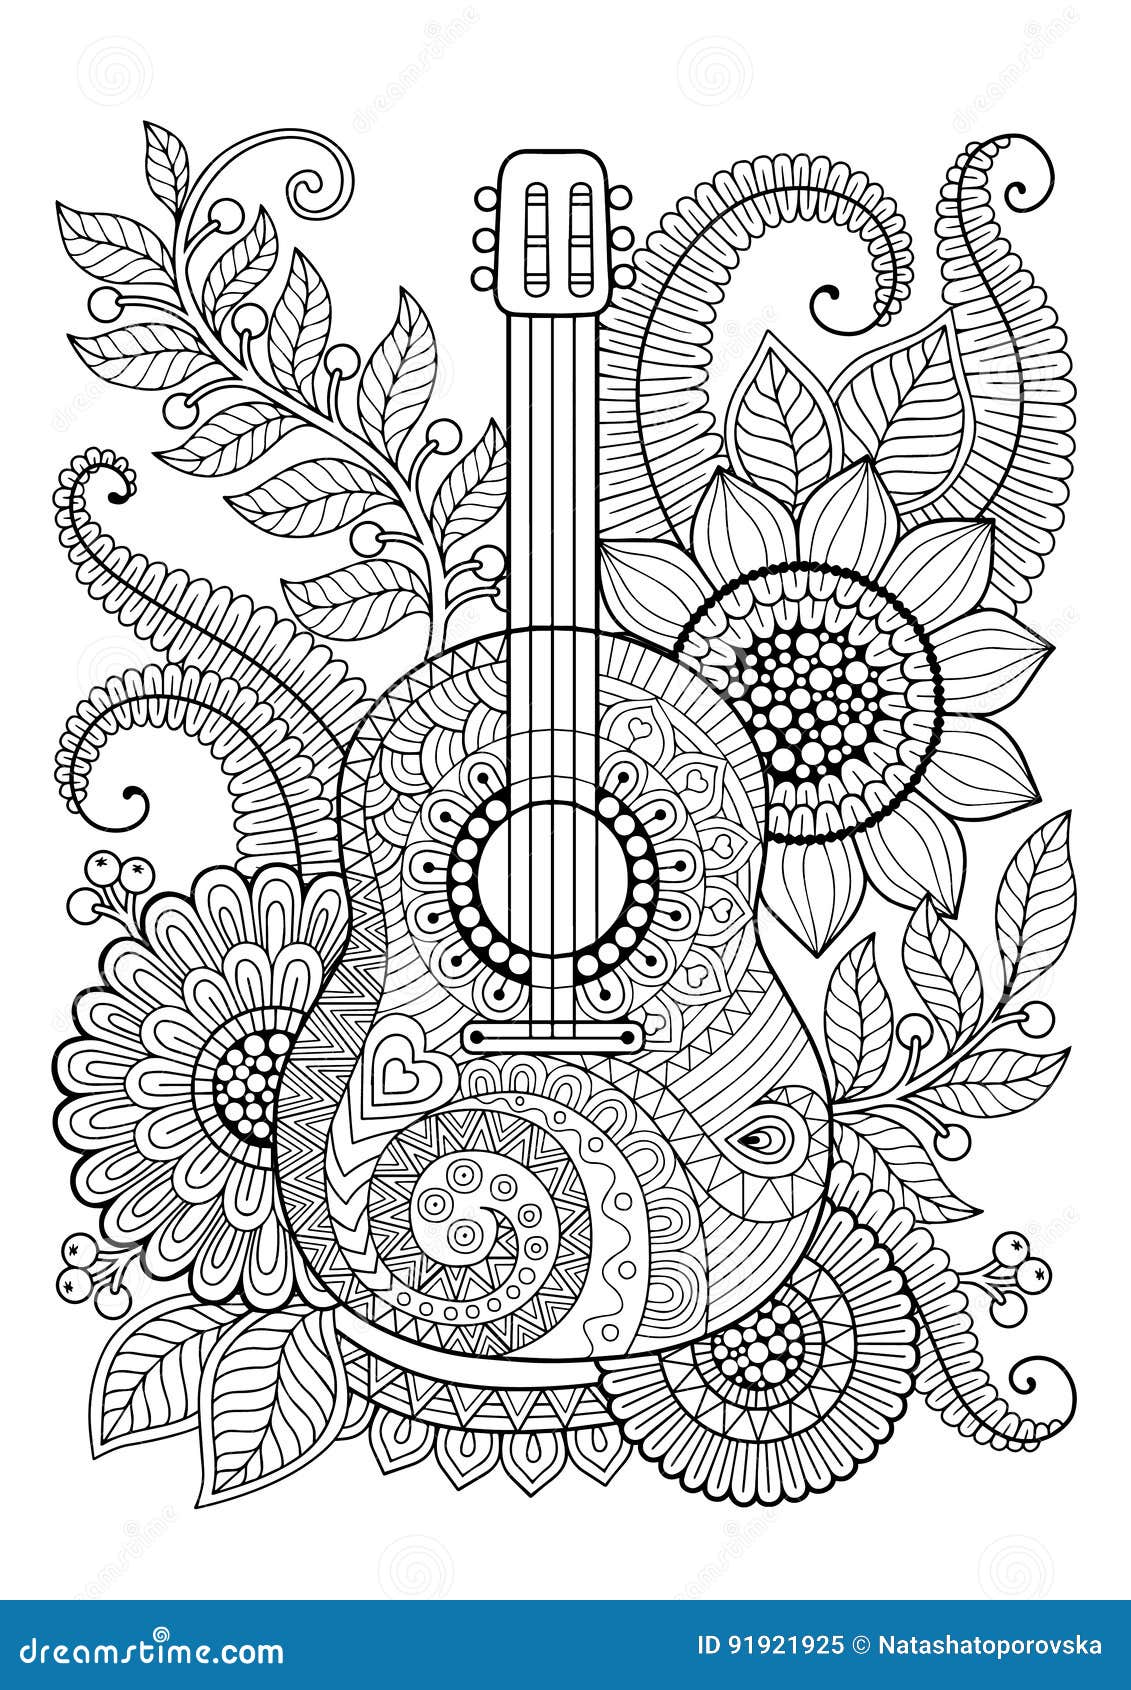 coloring book for adult and relax. guitar. maxican